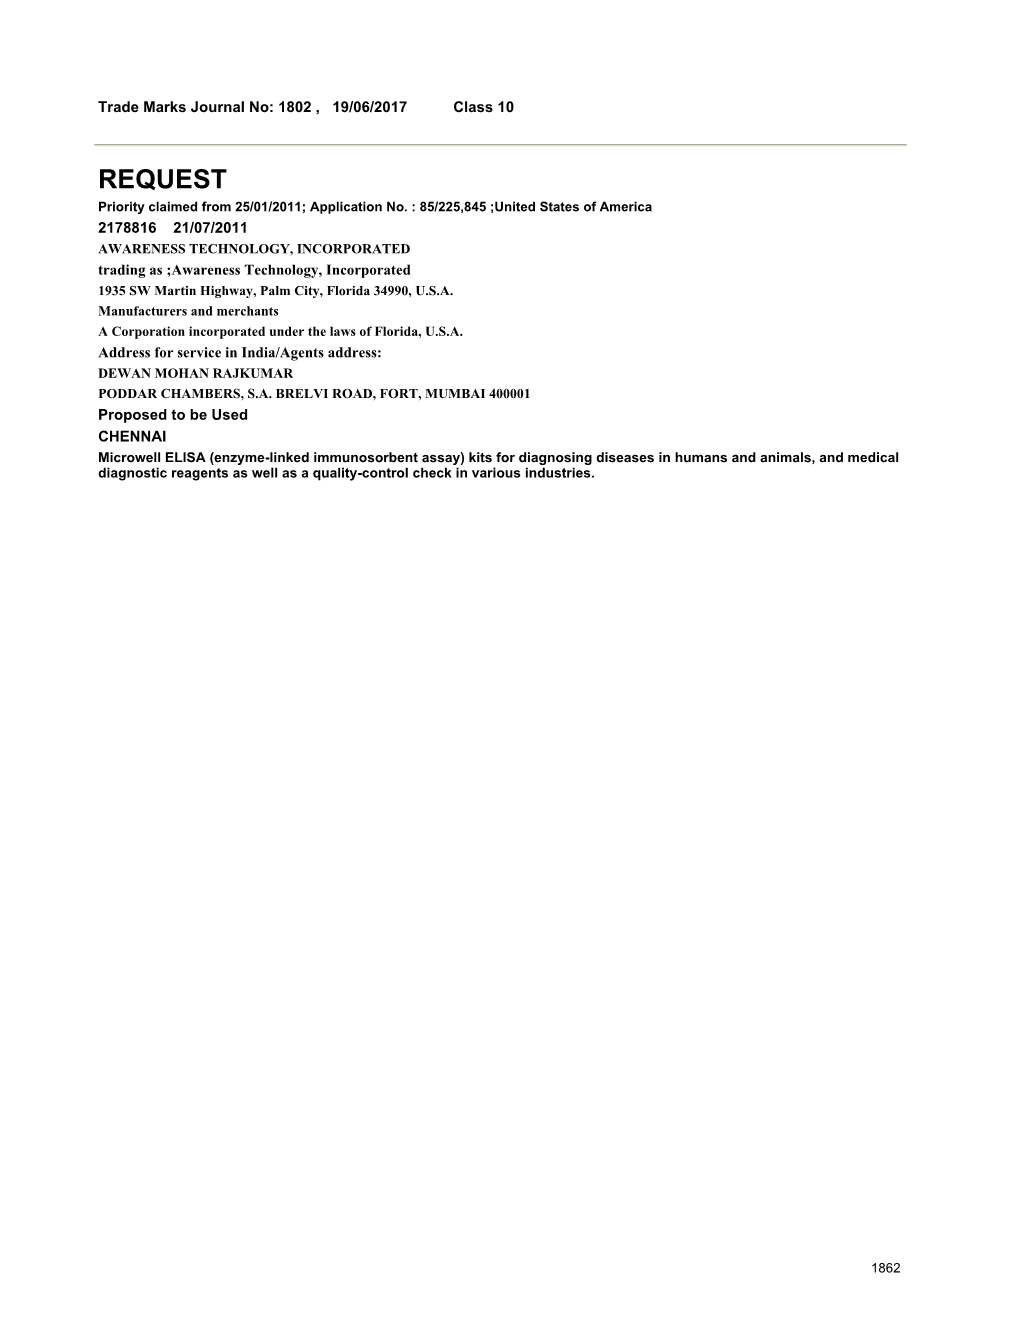 REQUEST Priority Claimed from 25/01/2011; Application No